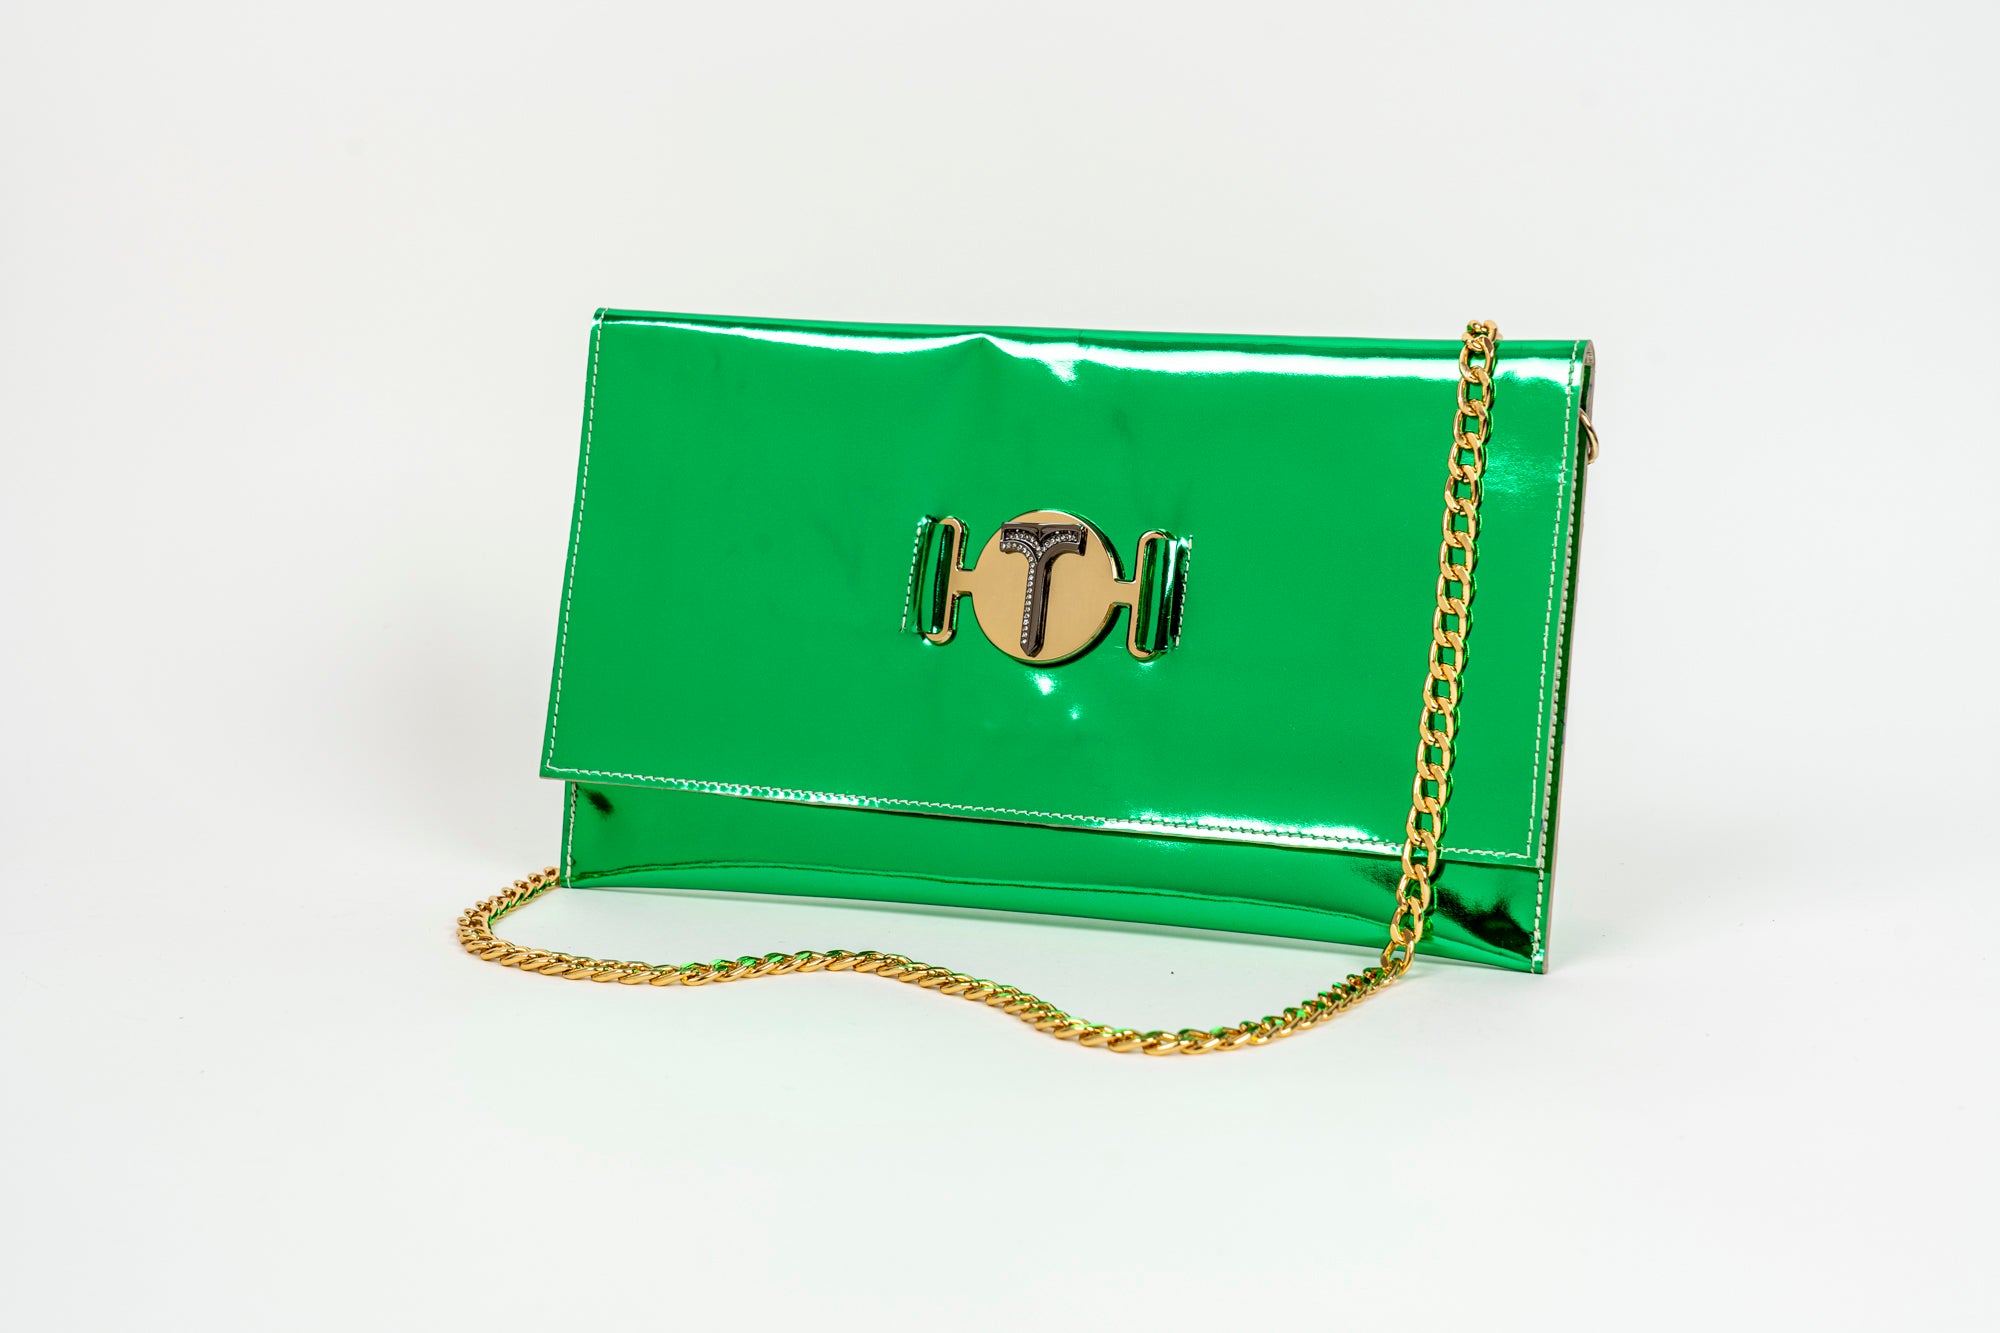 BORSA IN VERNICE Green/ Green patent leather bag